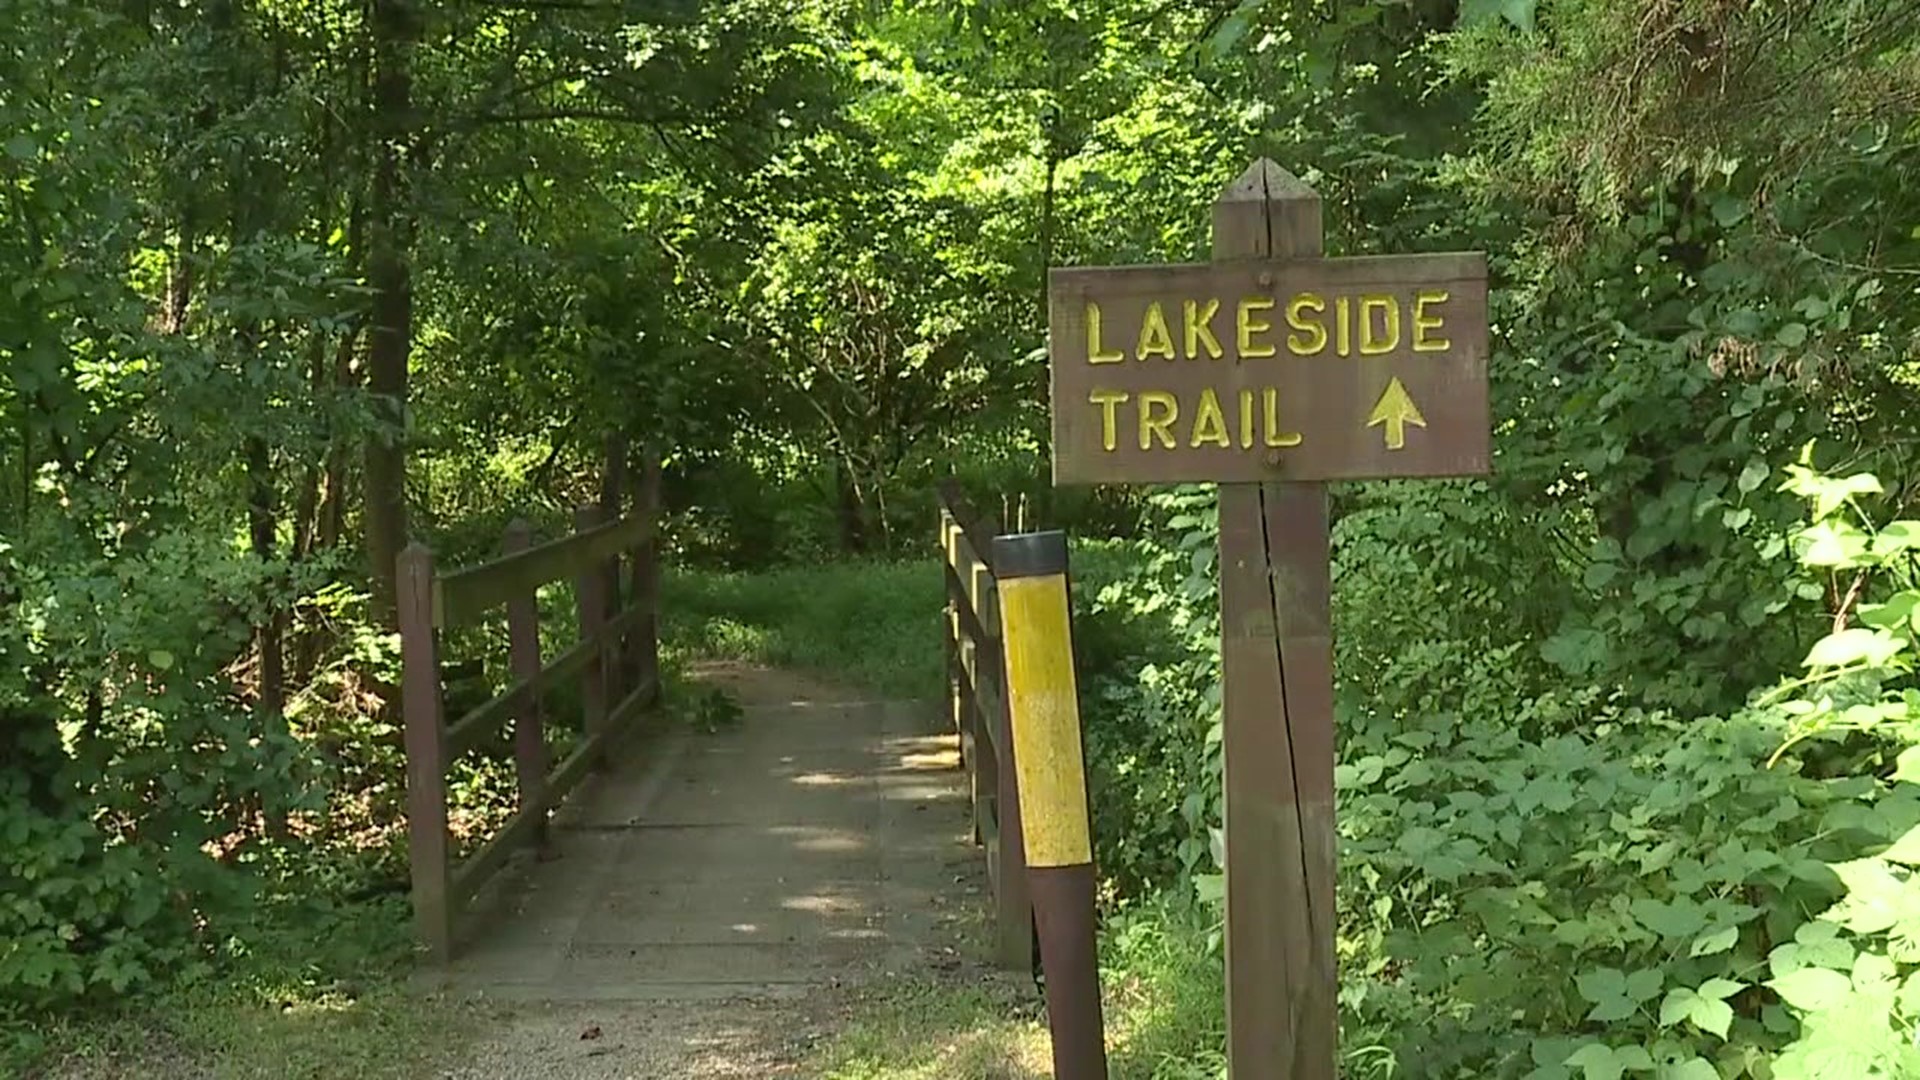 A refund may be given for state park reservations for those who can not follow the restrictions.